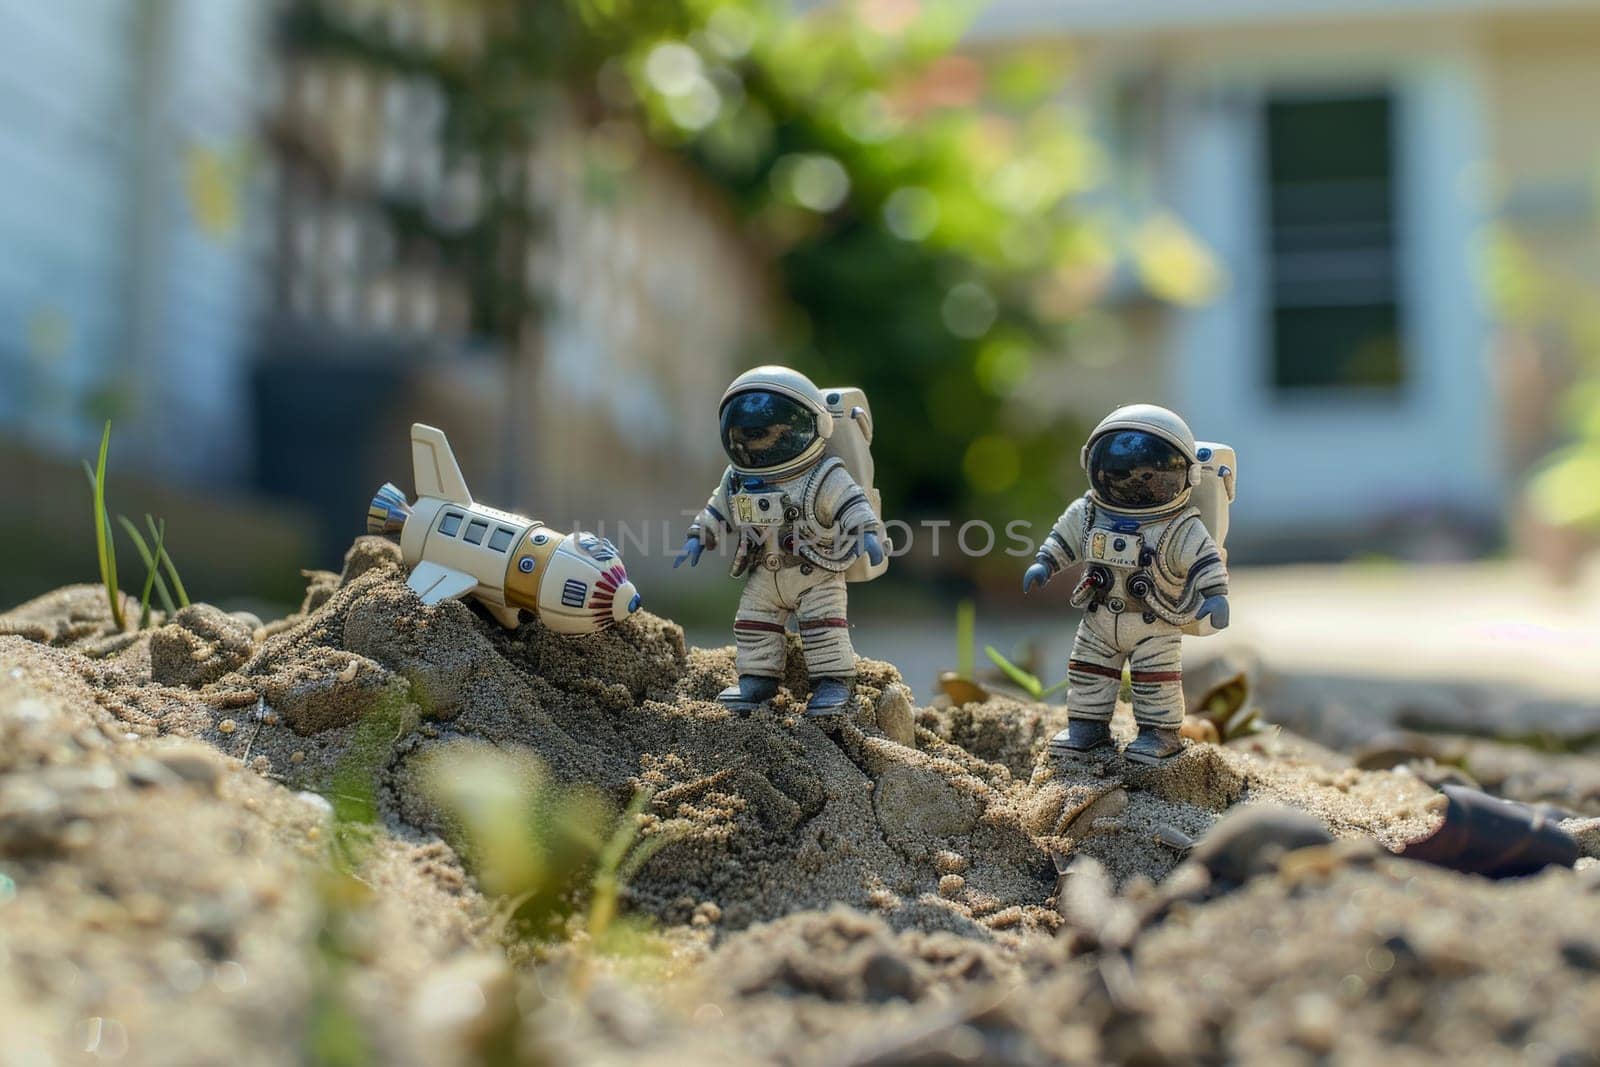 Miniature astronaut background, Miniature astronaut dolls exploring a sandpile in front of a house by nijieimu